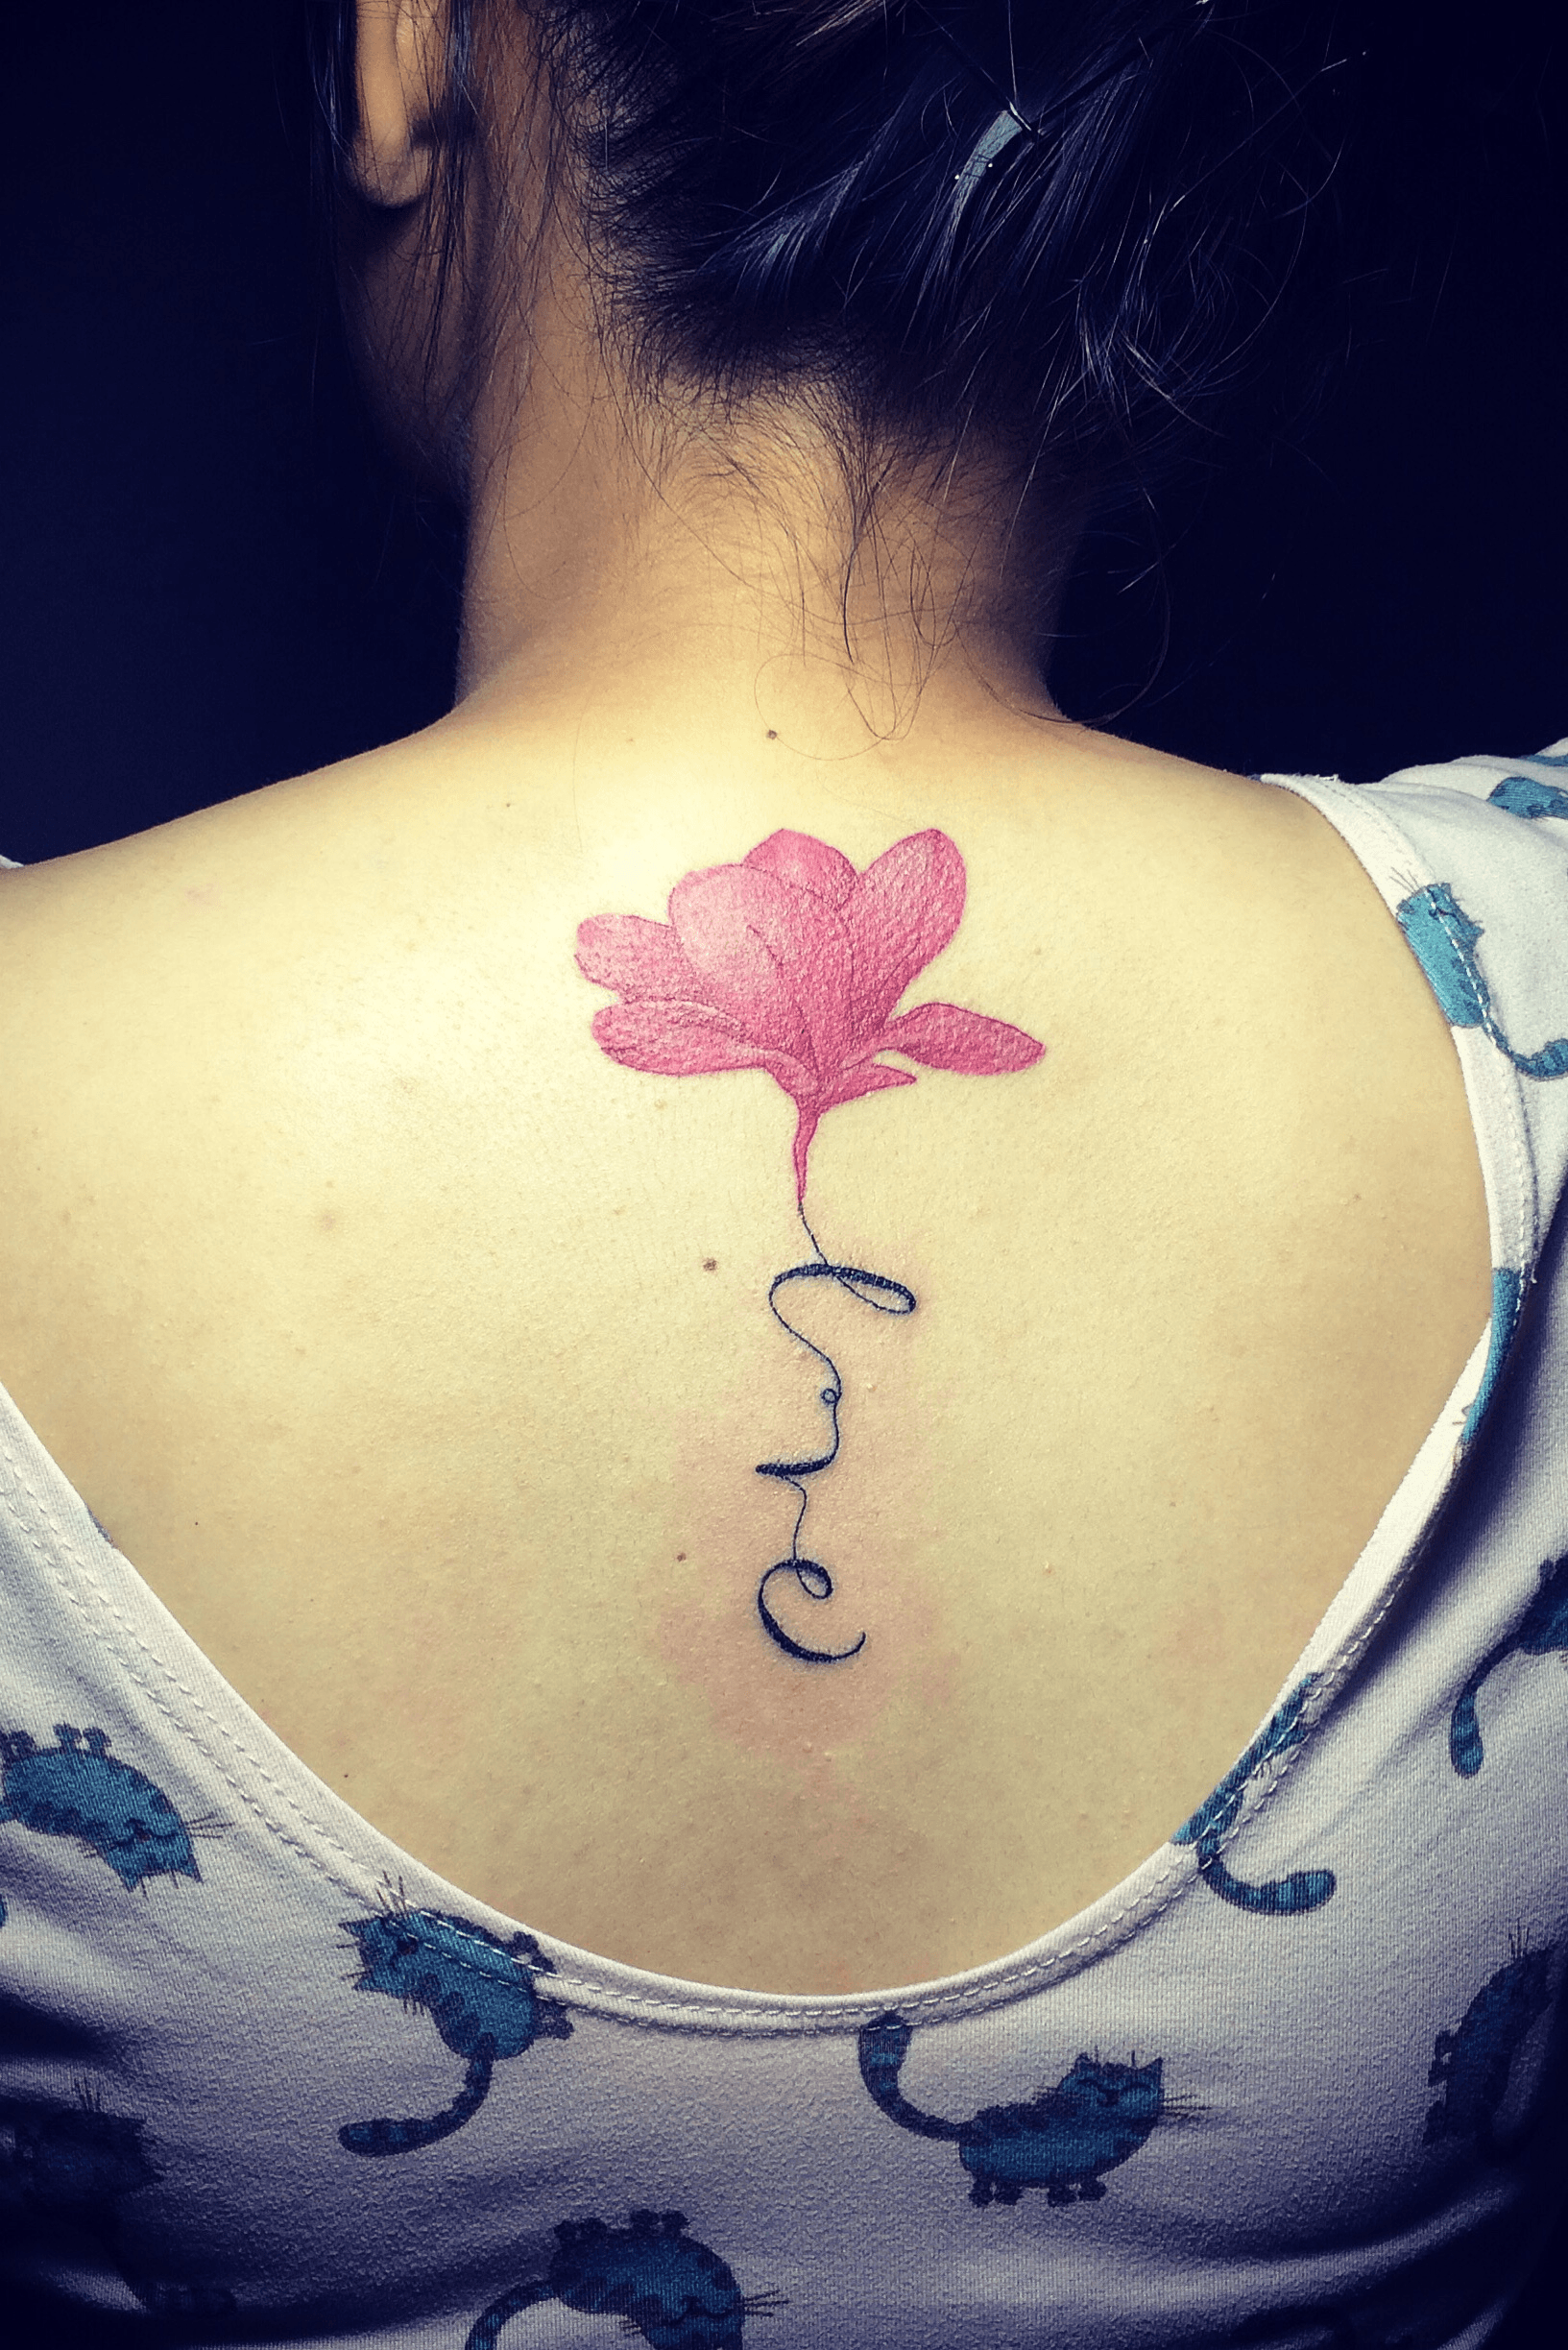 National MS Society on Twitter Once you become fearless life becomes  limitless  Instagram user melsafel sharing the inspiration behind her  tattoo after she was diagnosed with MS Do you have an